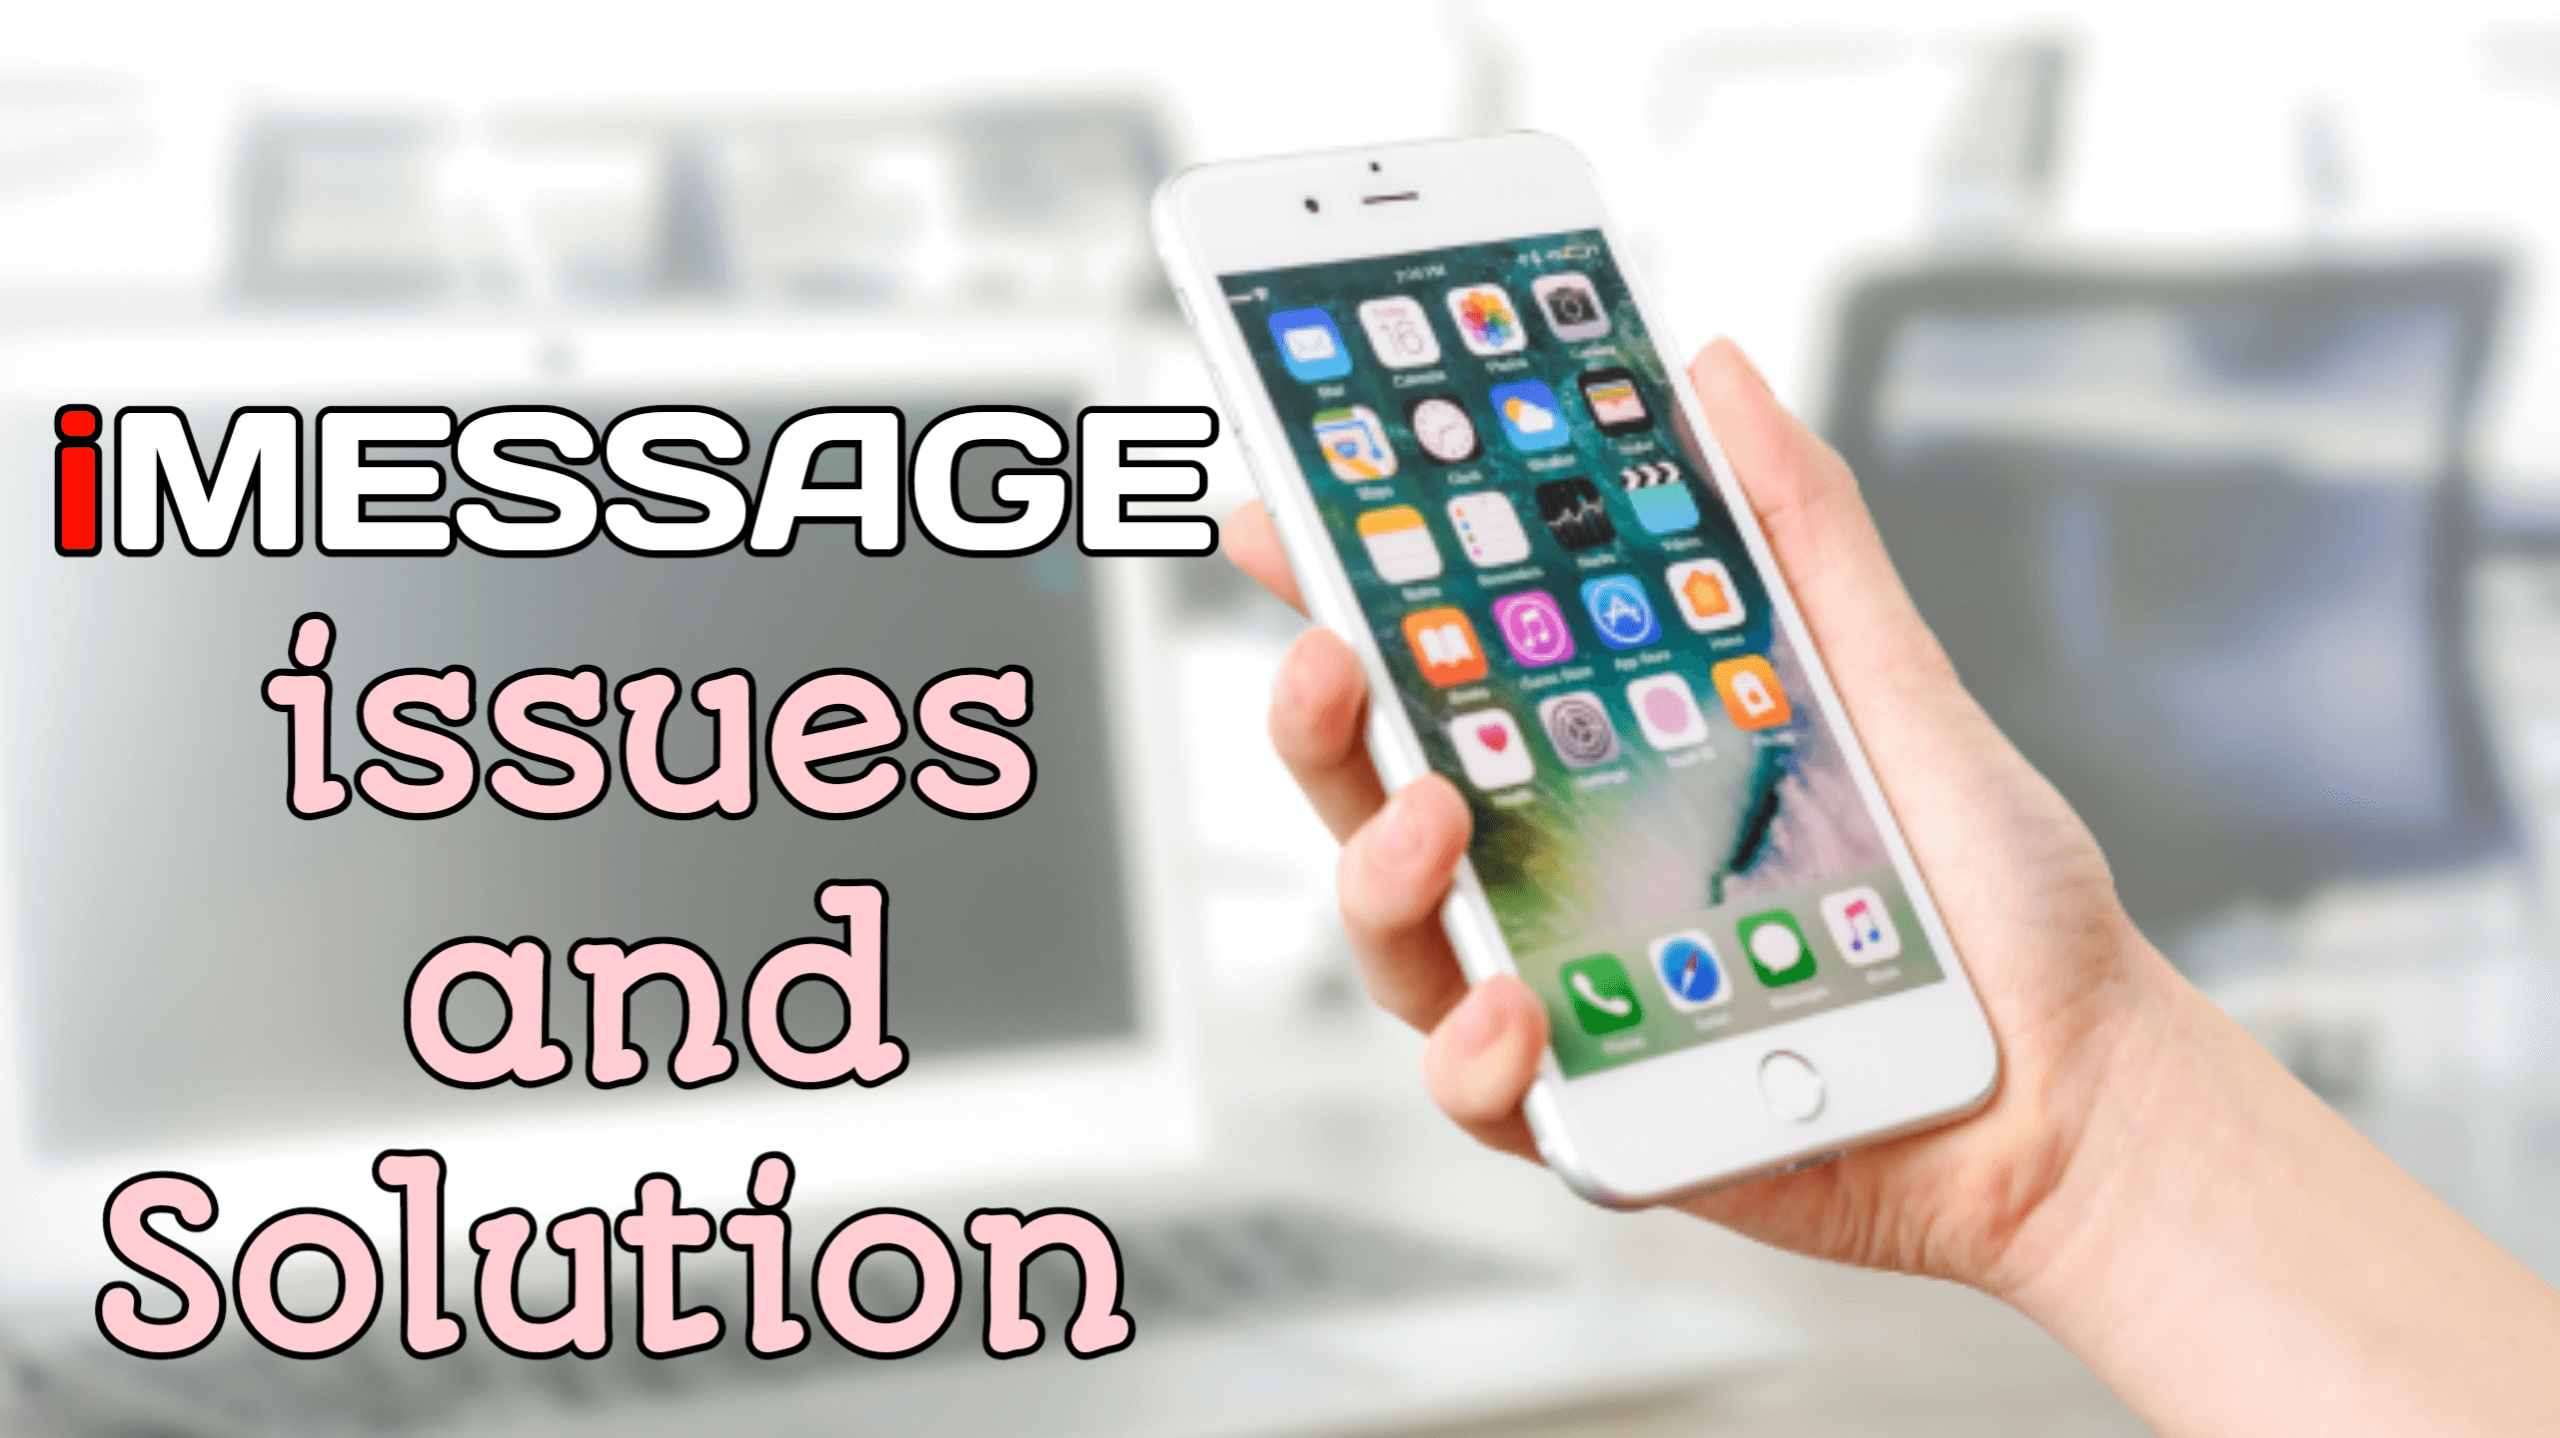 Common imessage problems and best solutions: Imessage pictures not showing and not getting imessage notifications ( for IOS )